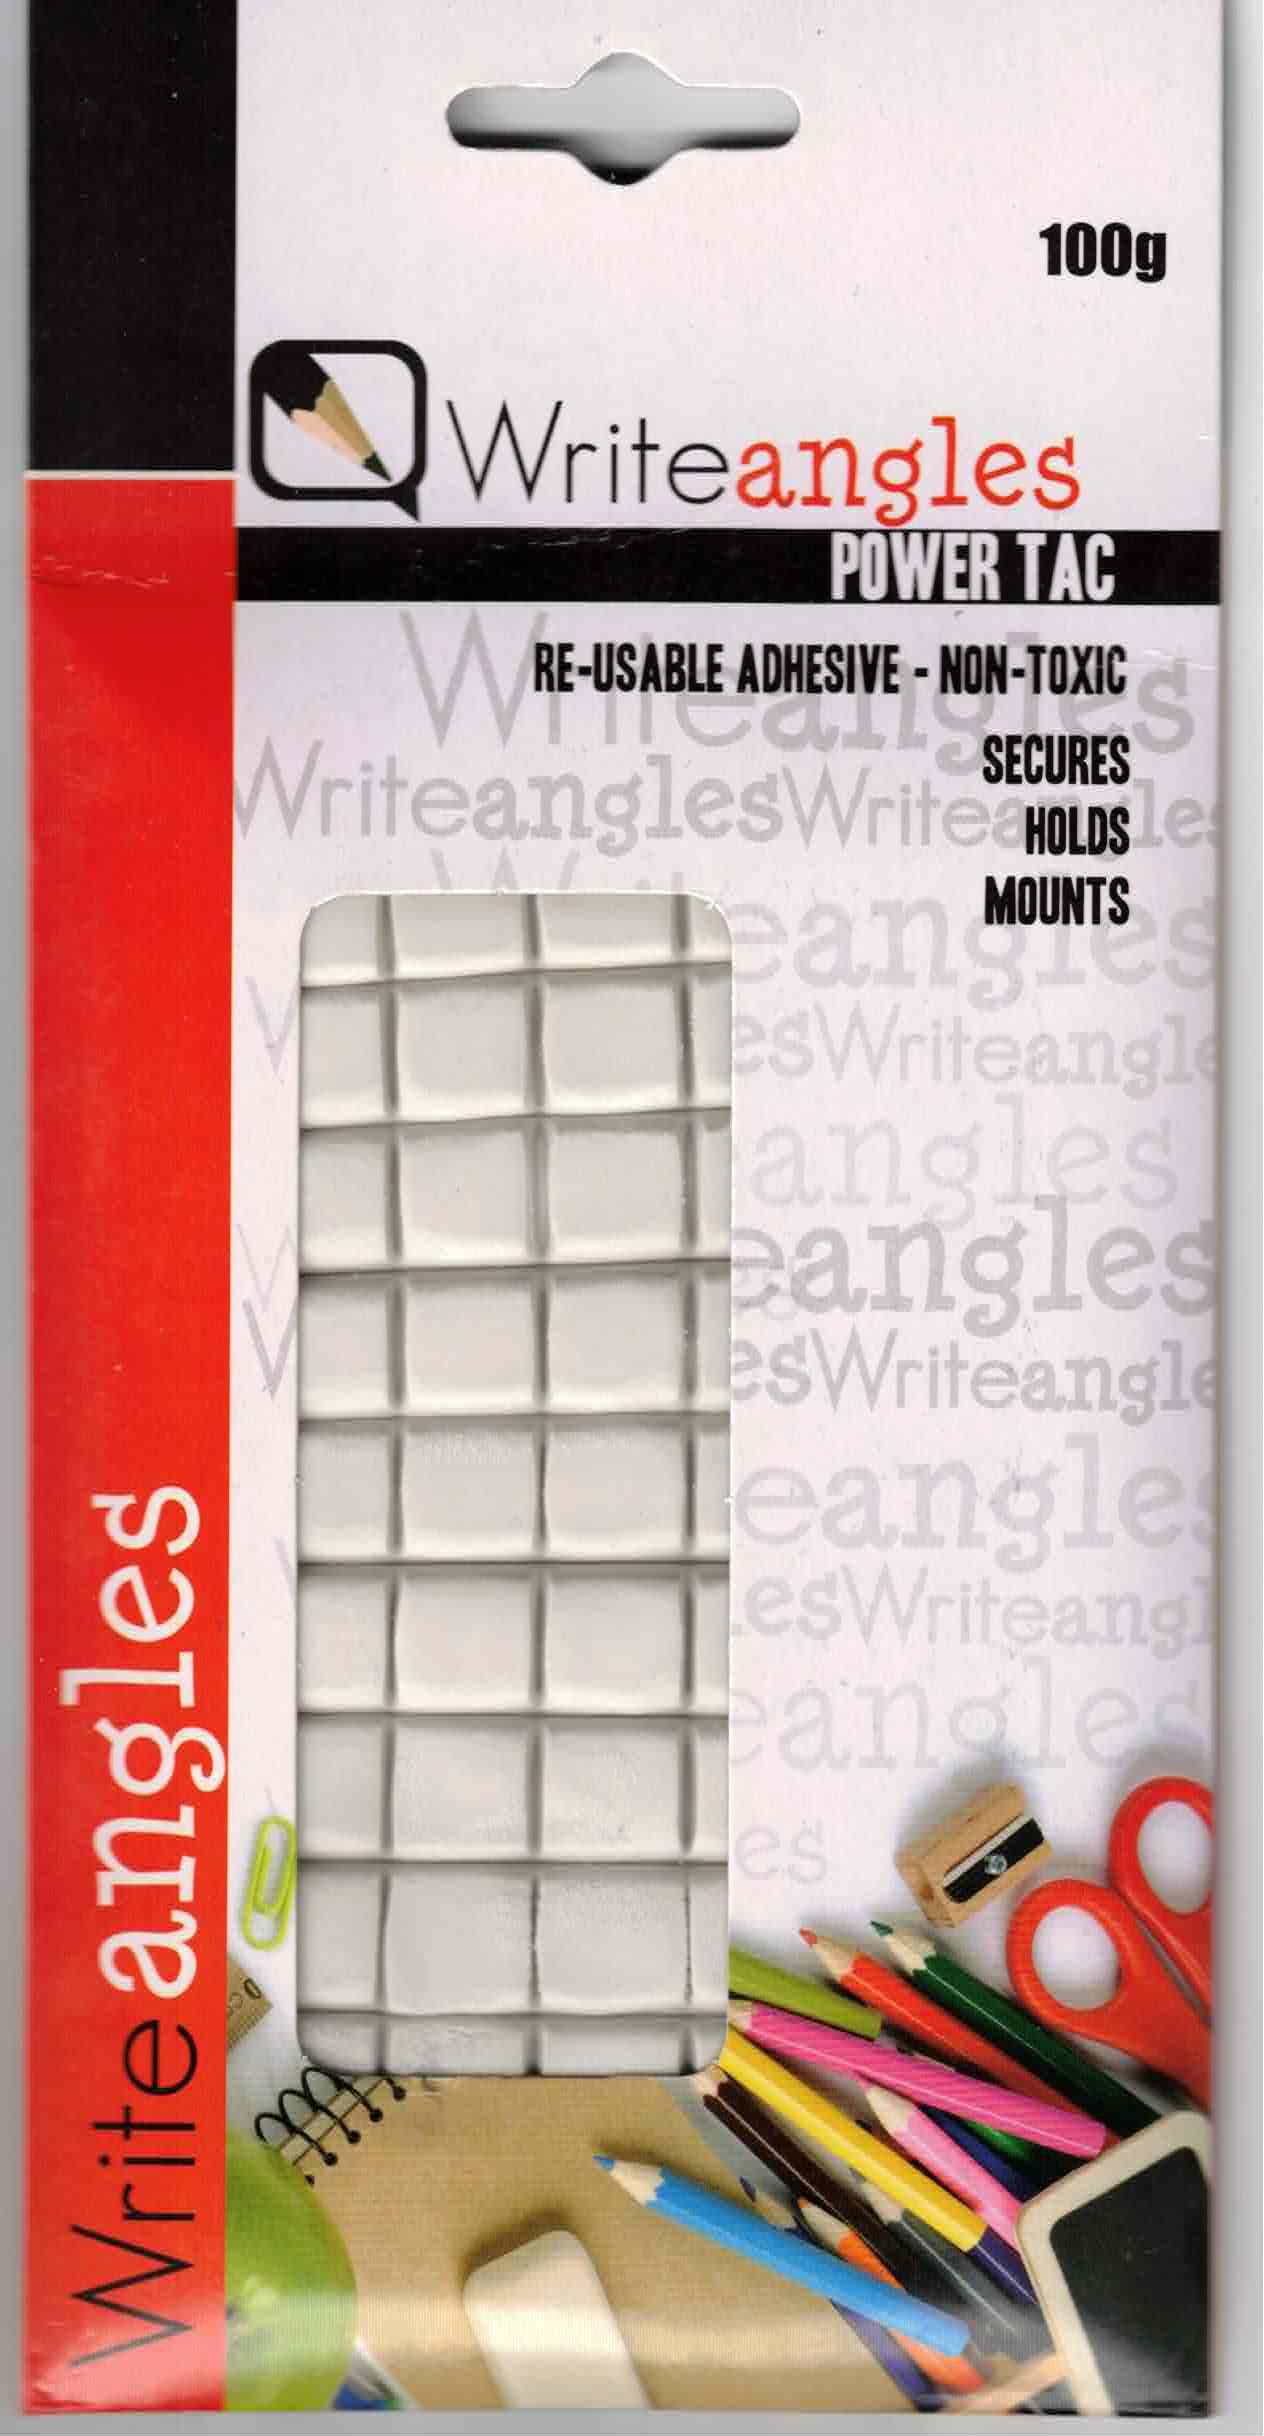 Writeangles Power Tac 100g Re-Useable Adhesive , Secures, Holds, Mounts SA3011B